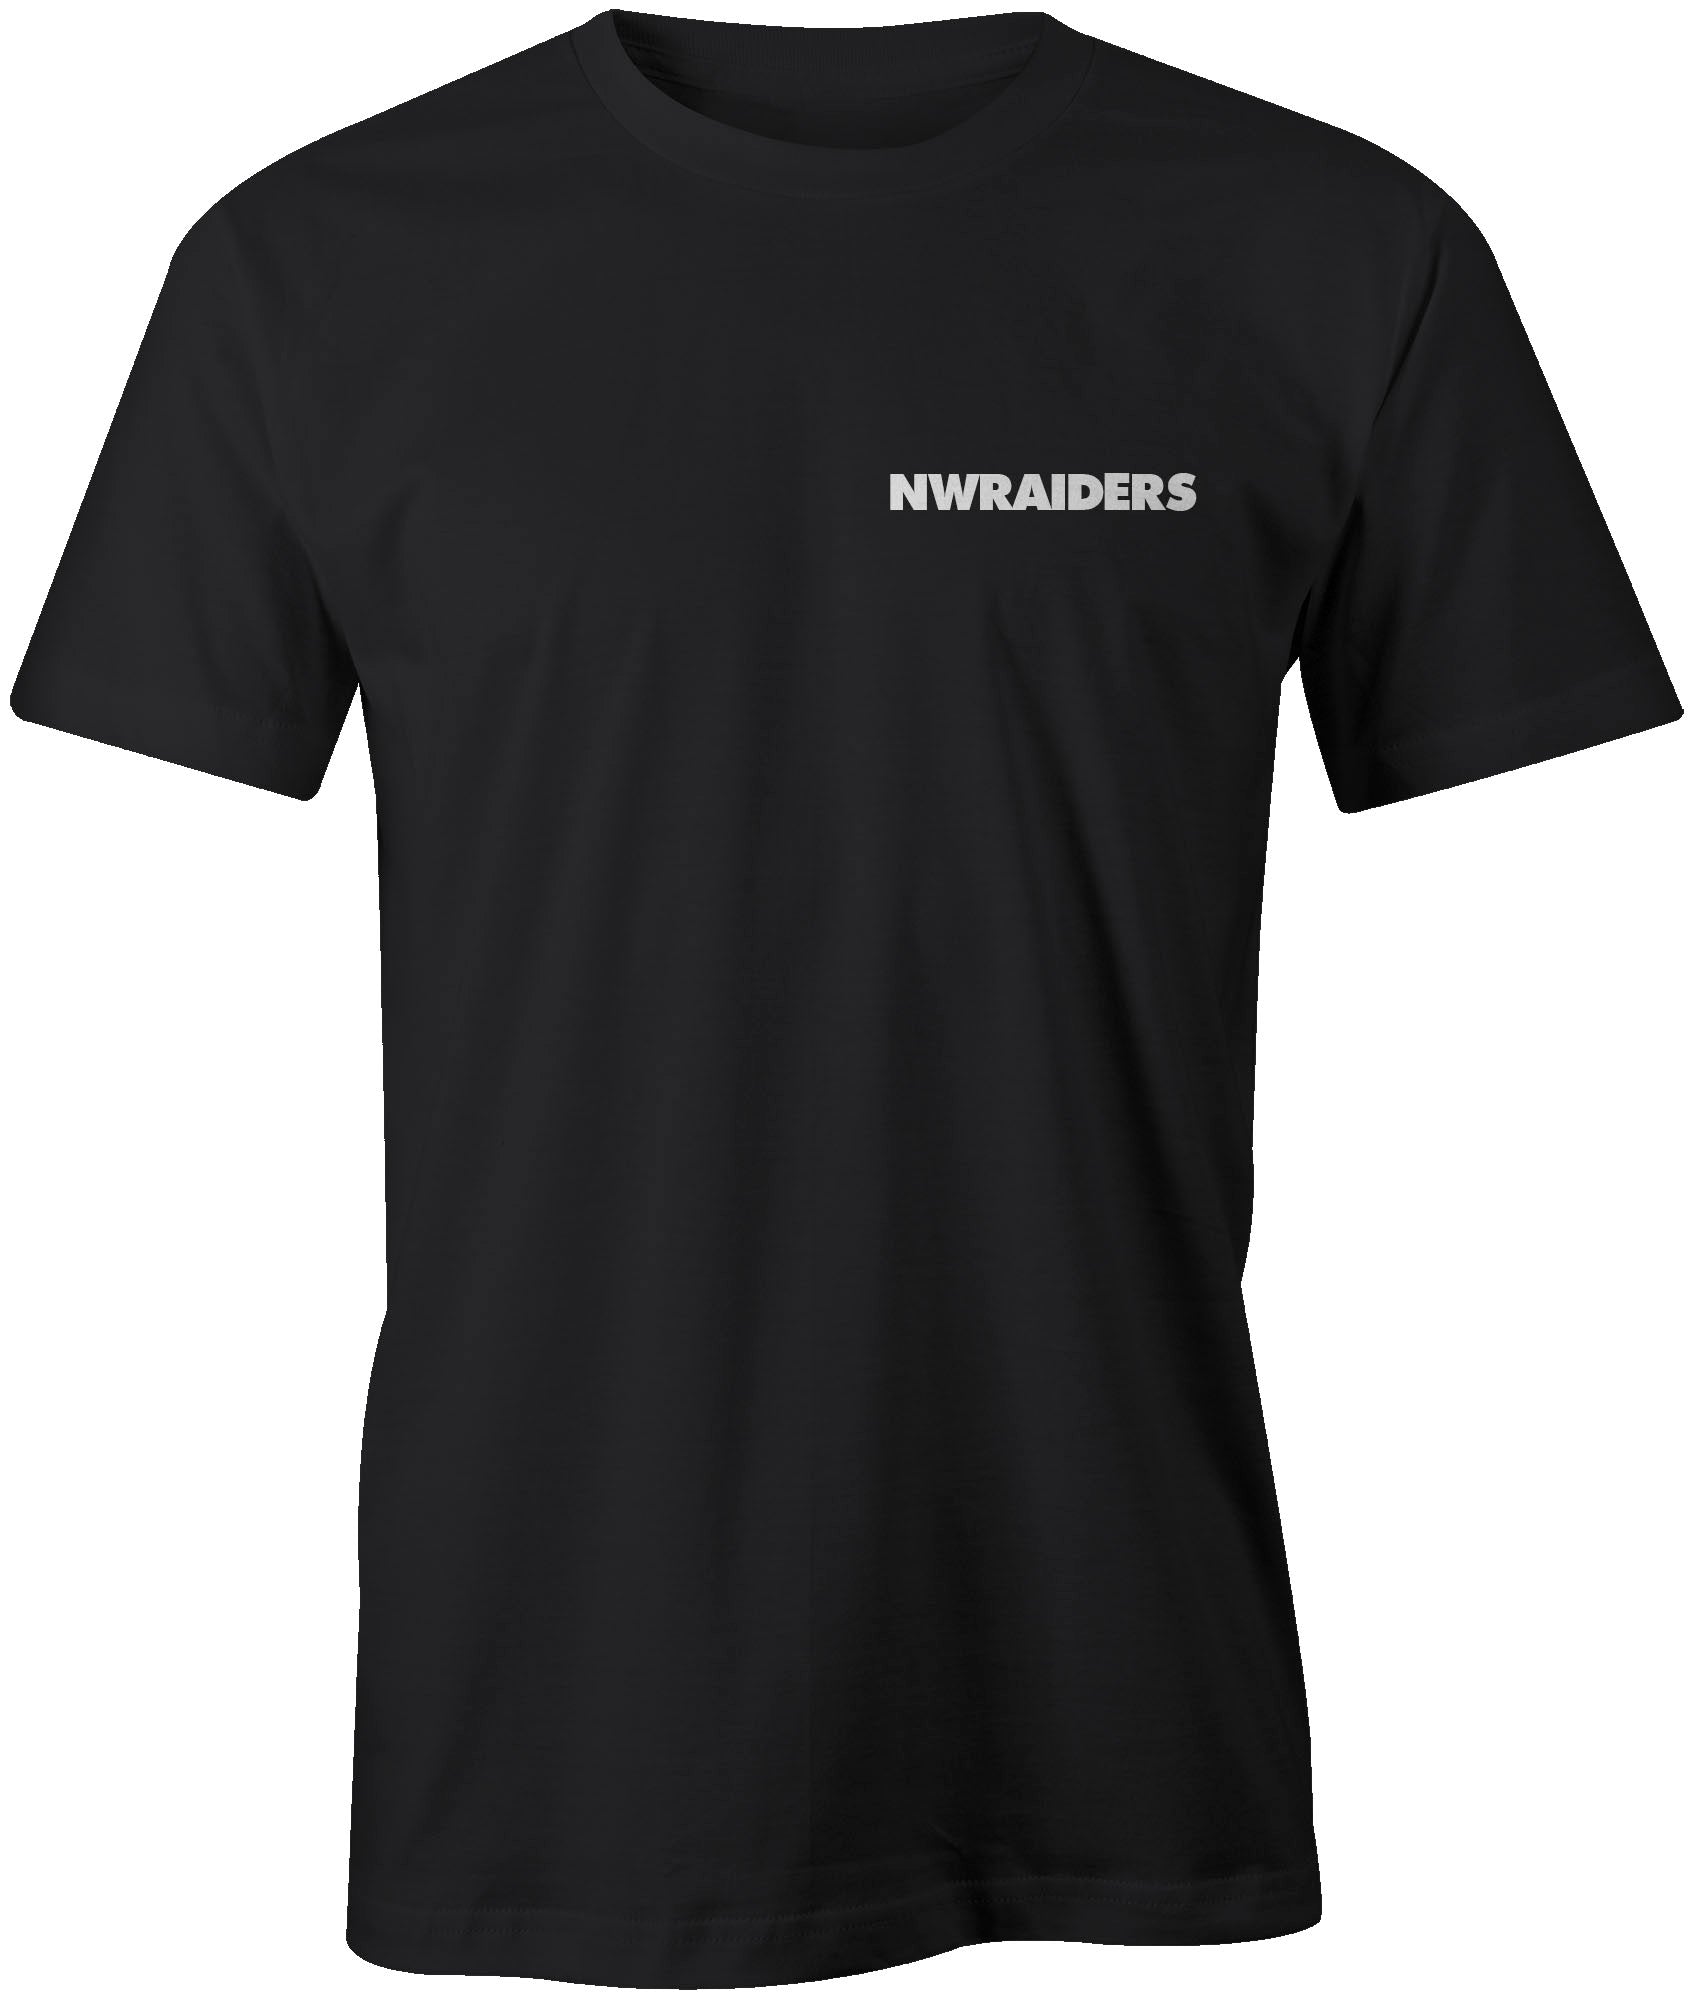 NWRAIDERS Double Sided Print T-Shirt